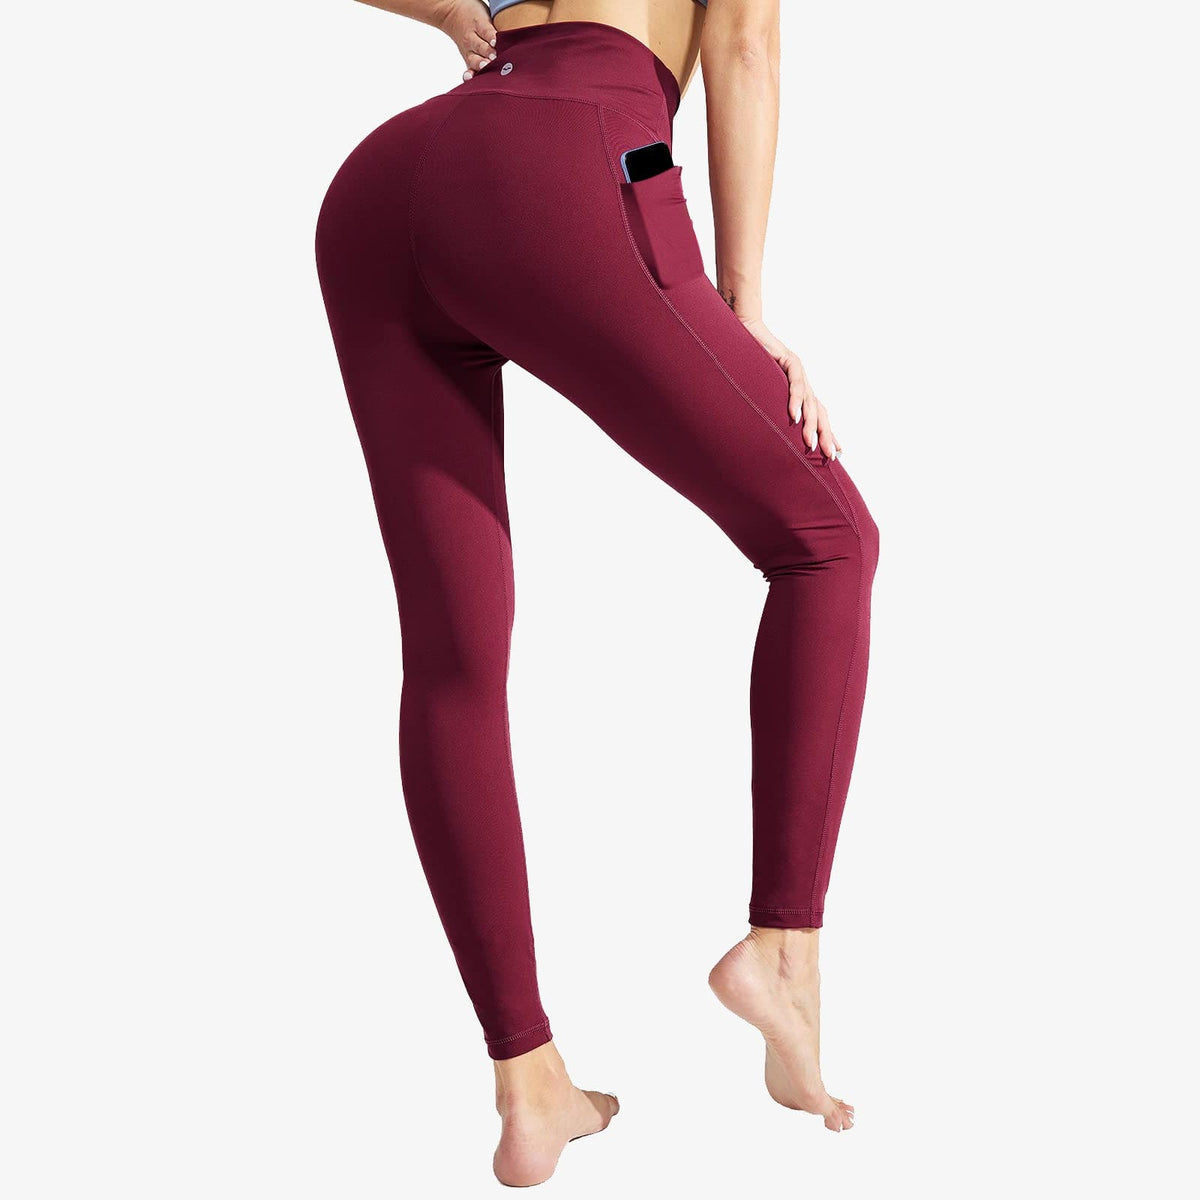 Women High Waist Workout Yoga Pants Athletic Legging with Pockets Women Yoga Pants Red / S MIER